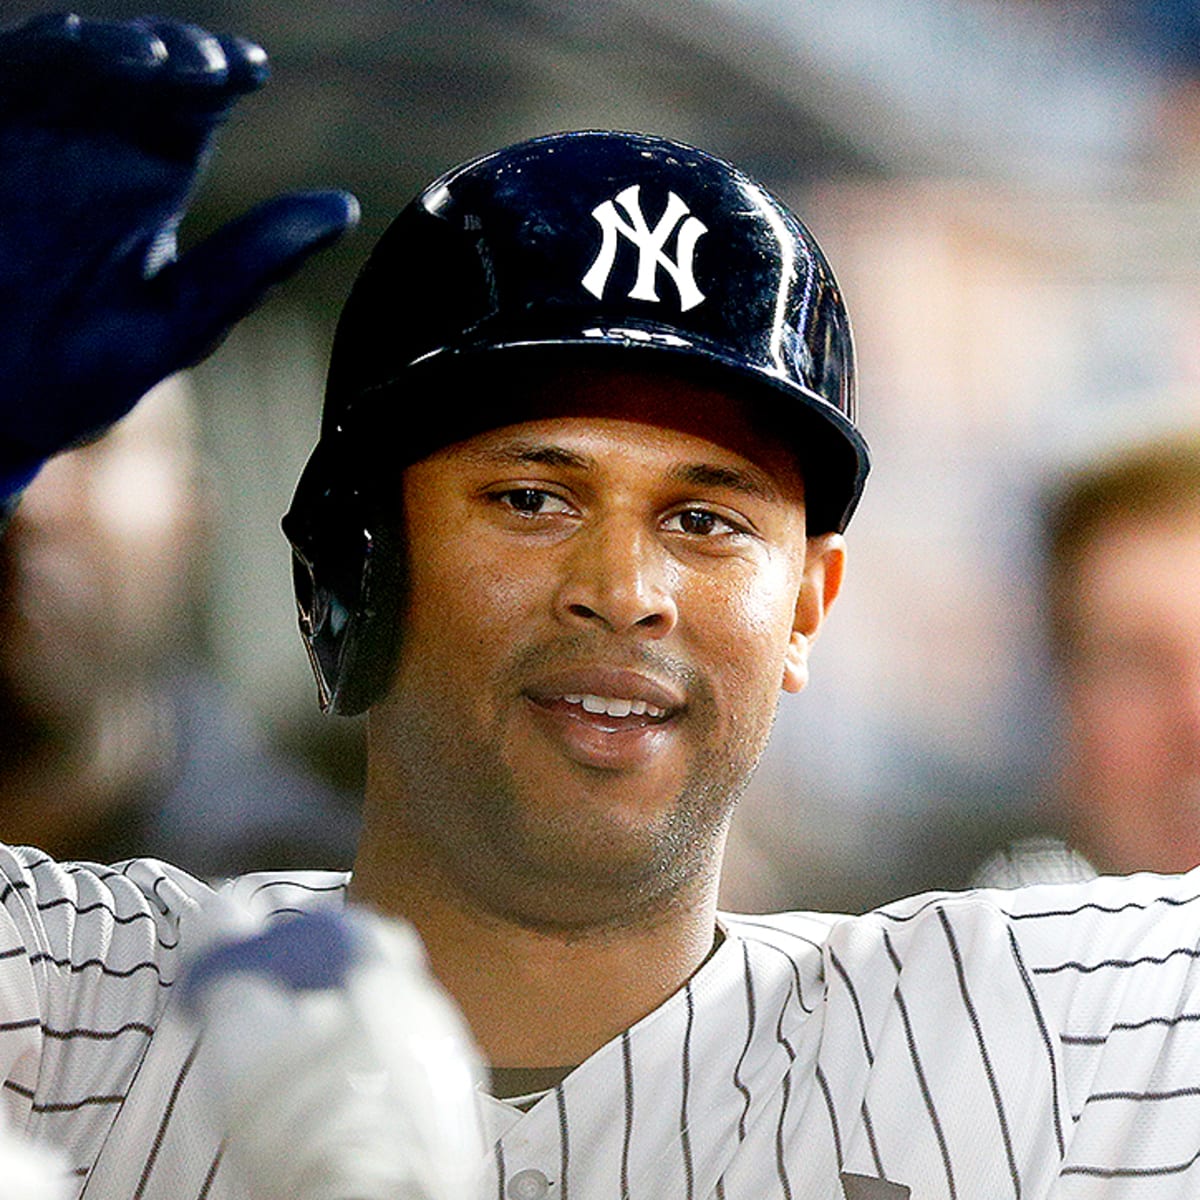 Yankees' Aaron Hicks glad he played winter ball in offseason